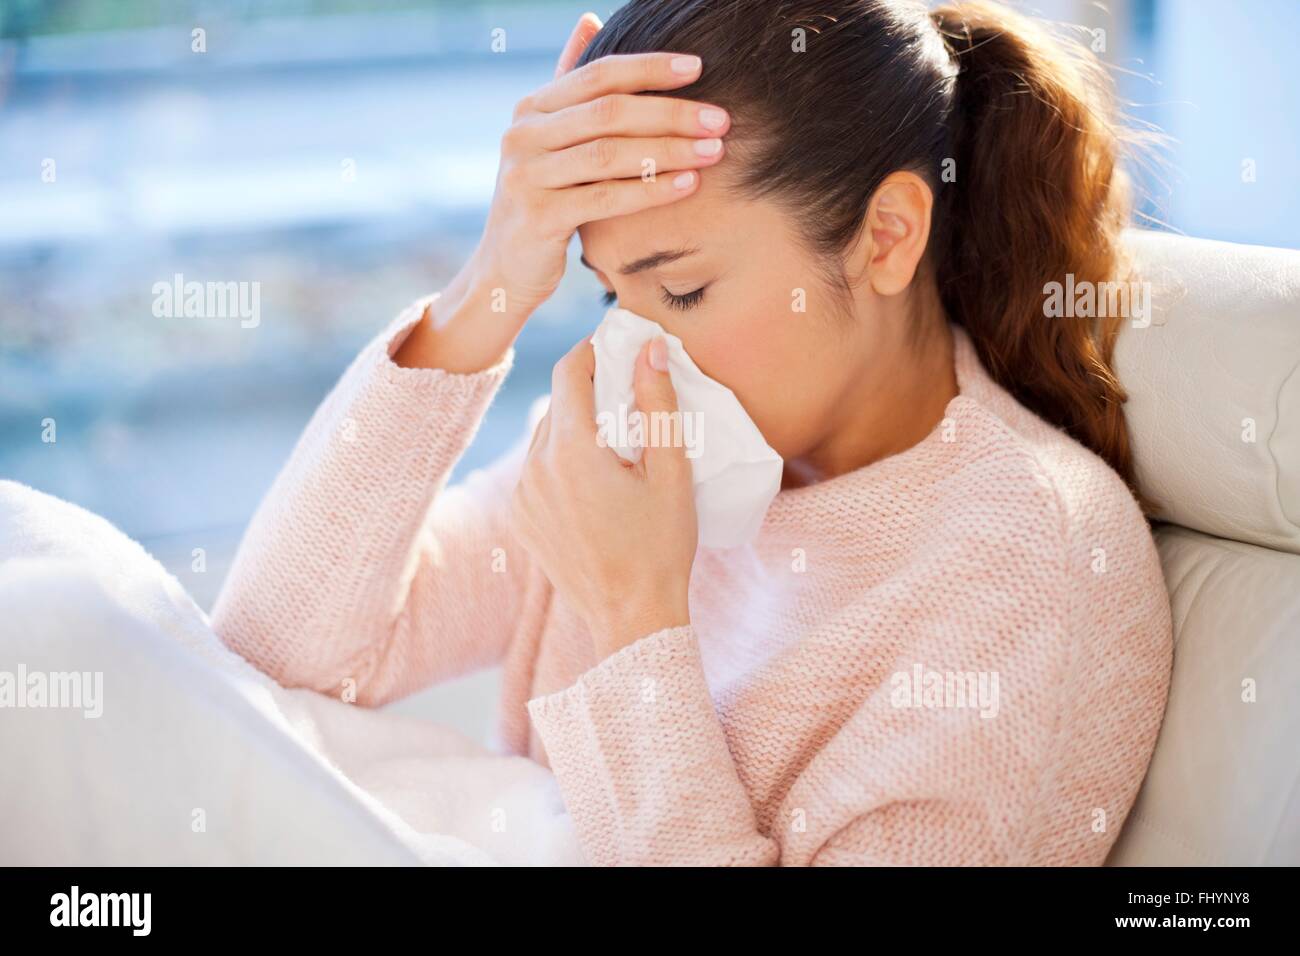 MODEL RELEASED. Woman blowing her nose with her hand on her forehead. Stock Photo